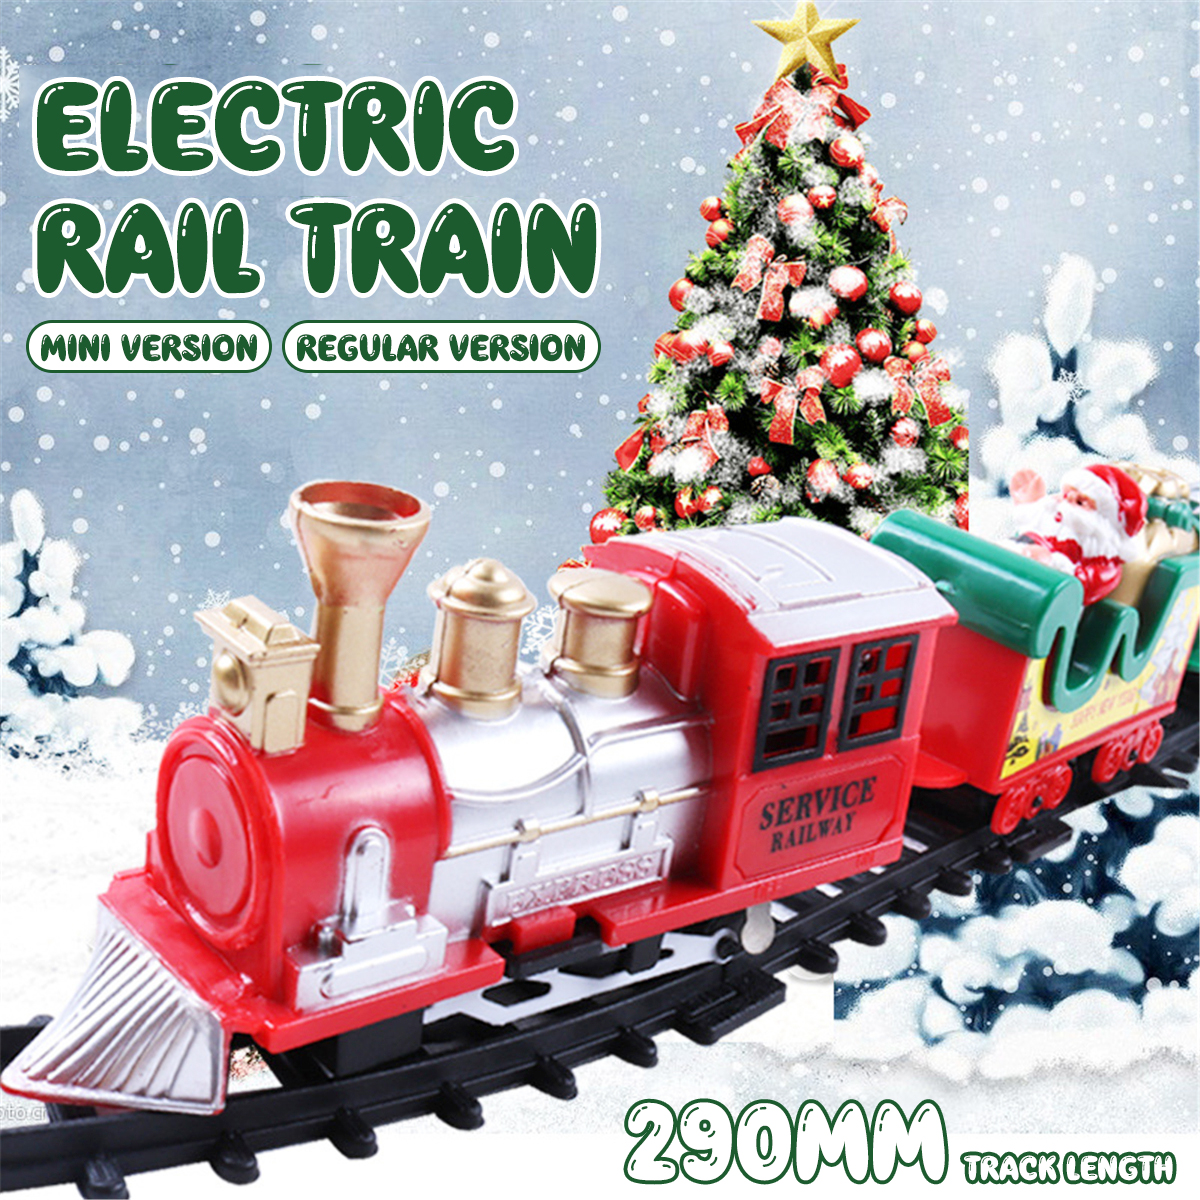 Mini-Electric-ABS-DIY-Assembly-Realistic-Front-Rail-Train-Track-Play-Fun-Model-Toy-for-Kids-Christma-1766568-2